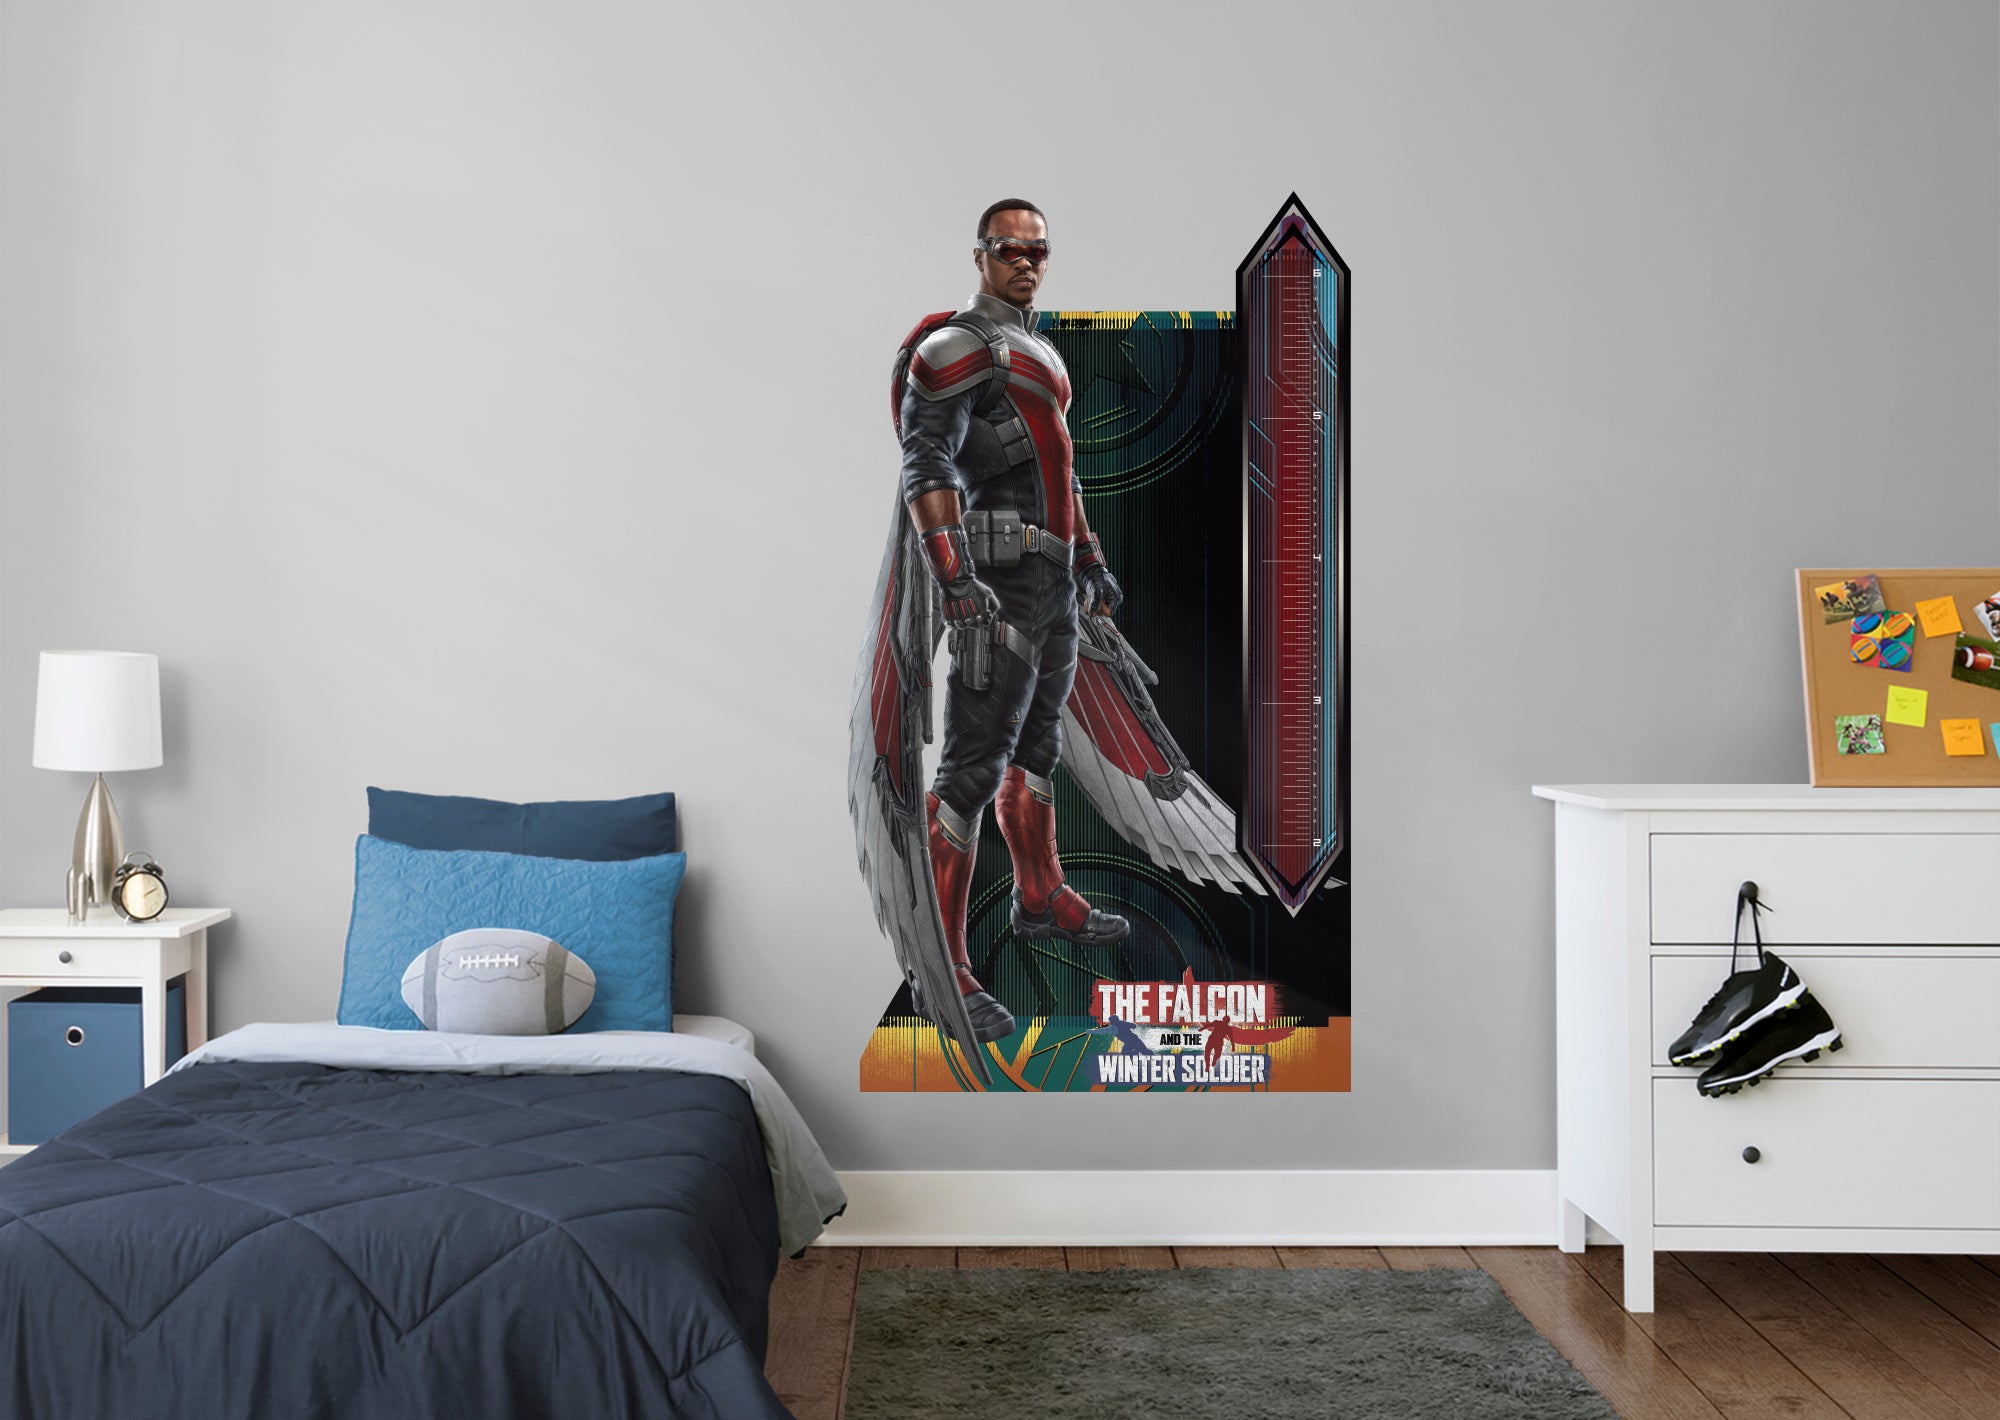 The Falcon & The Winter Soldier Growth Chart Falcon - Officially Licensed Marvel Removable Wall Decal Growth Chart (45"W x 42"H)